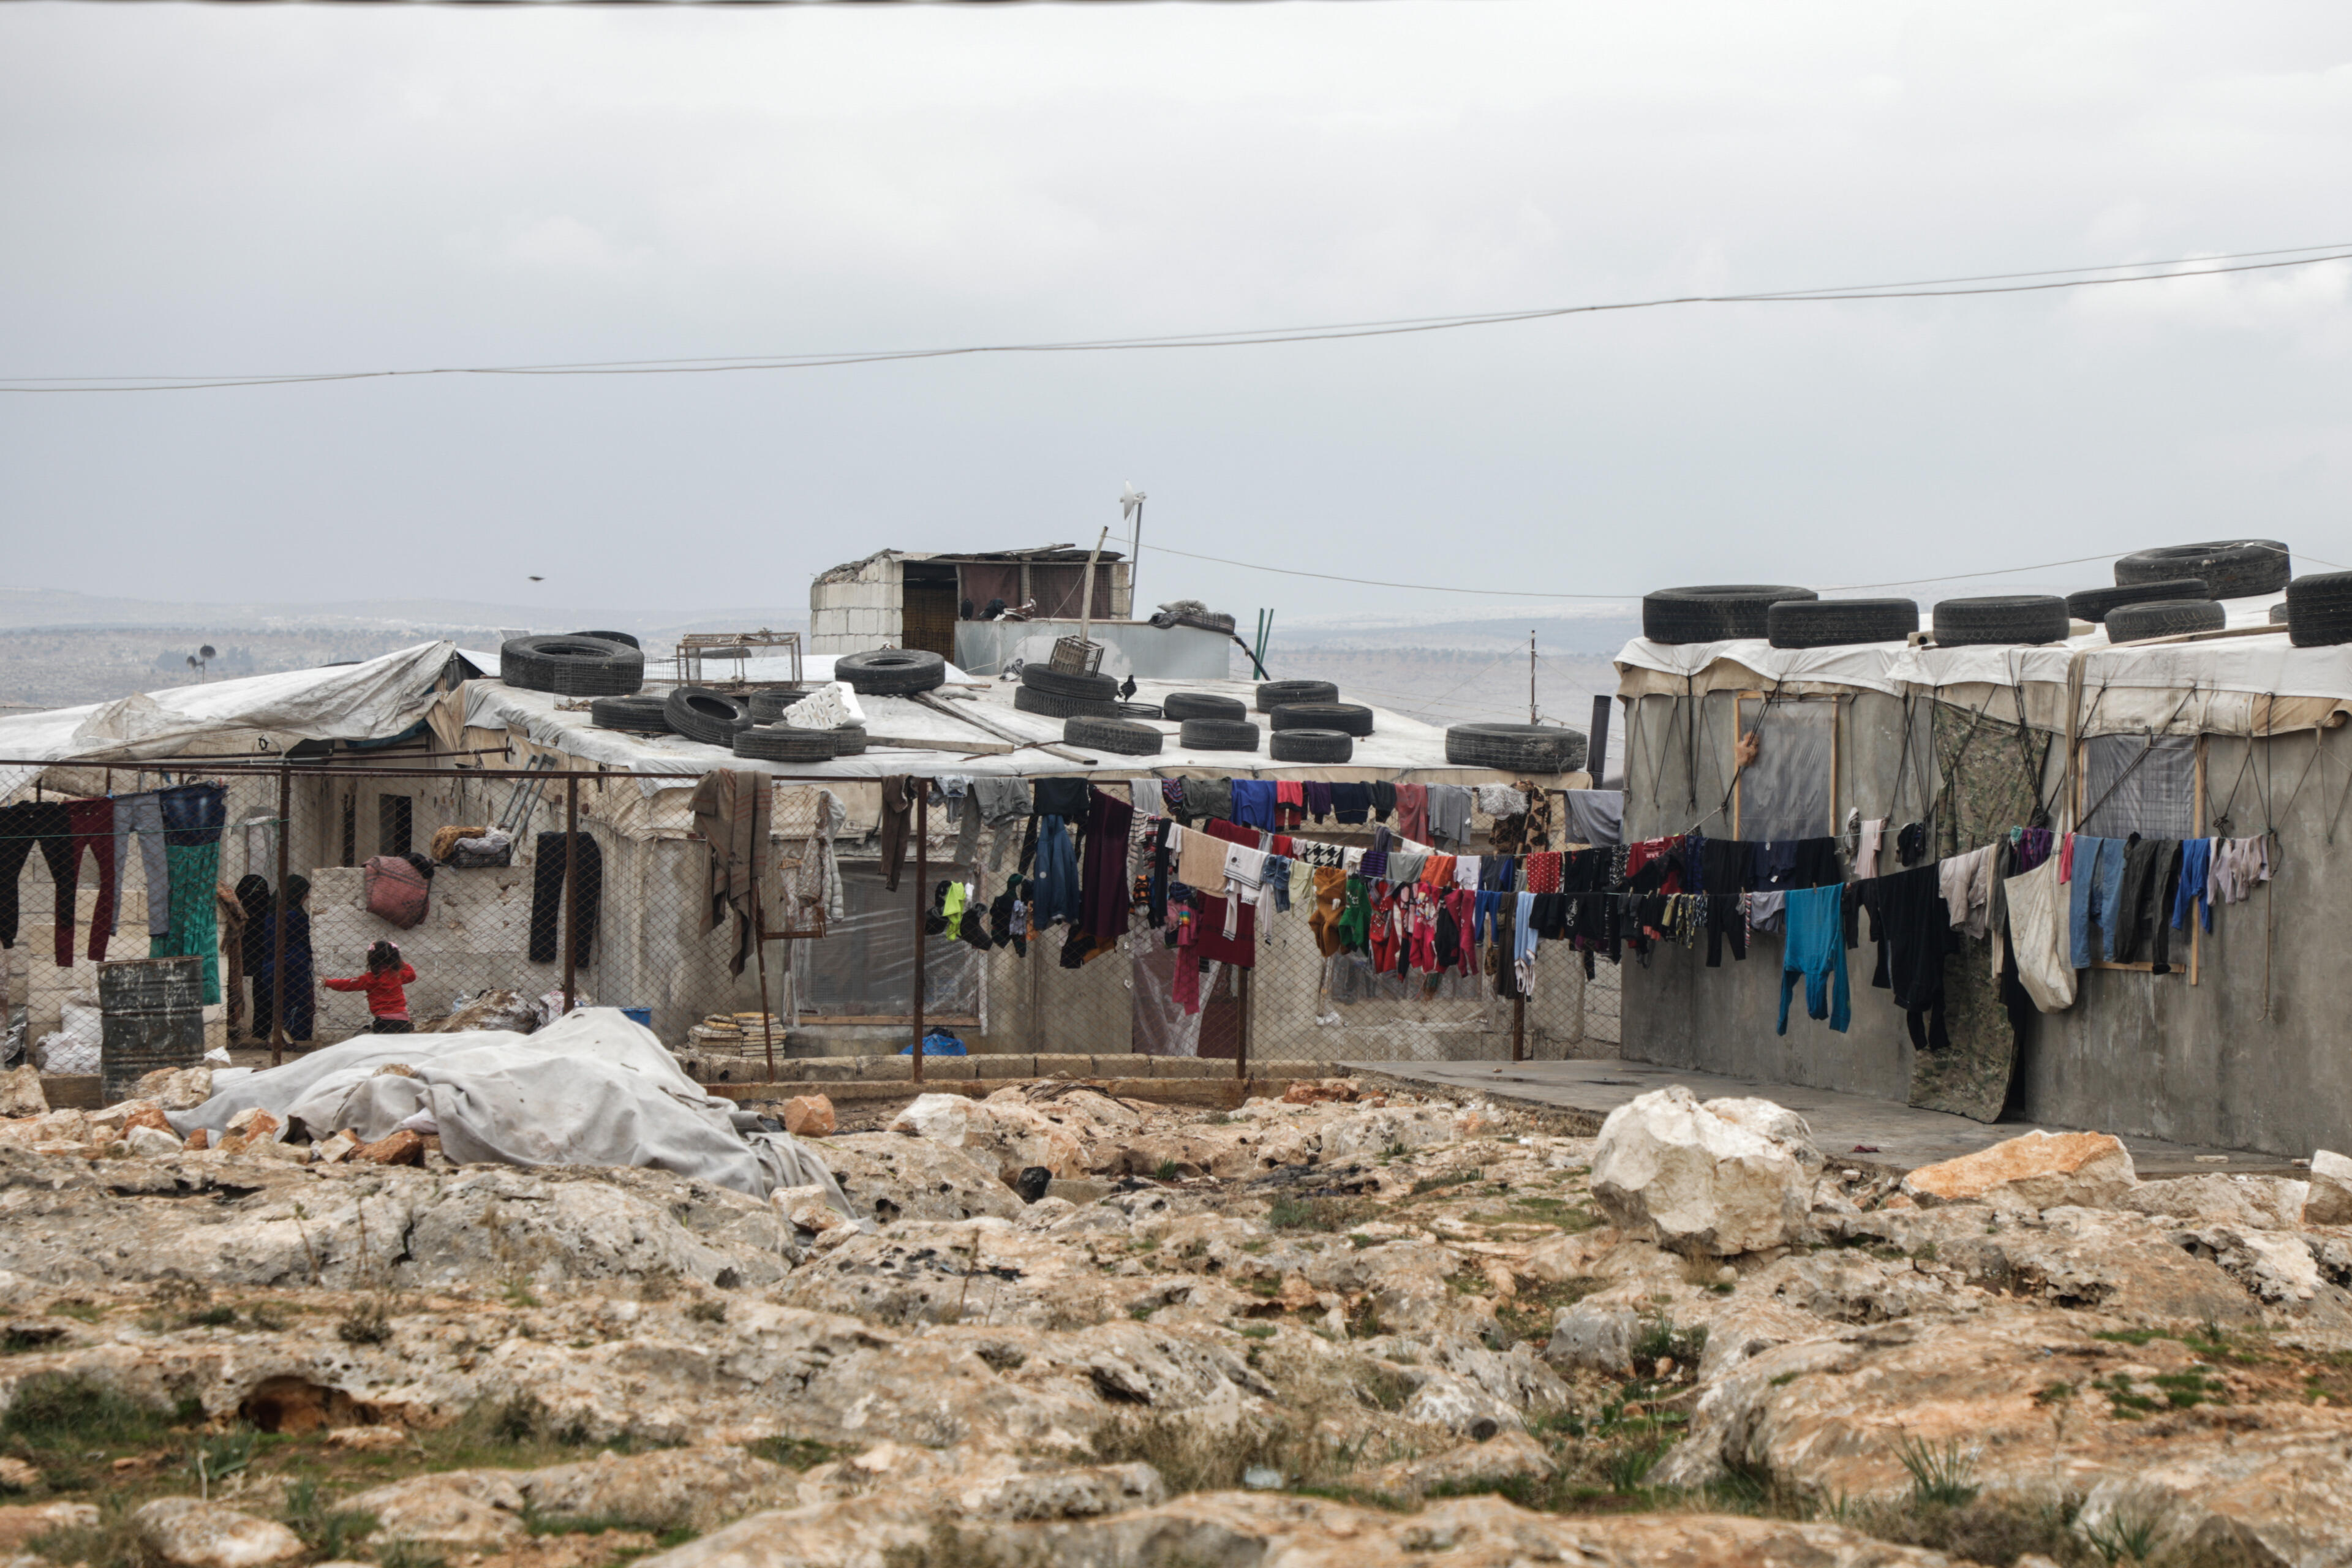 Women and children stand near clothes hanging to dry in a settlement where the IRC is assisting displaced people on the outskirts of the town of Deir Hassan.